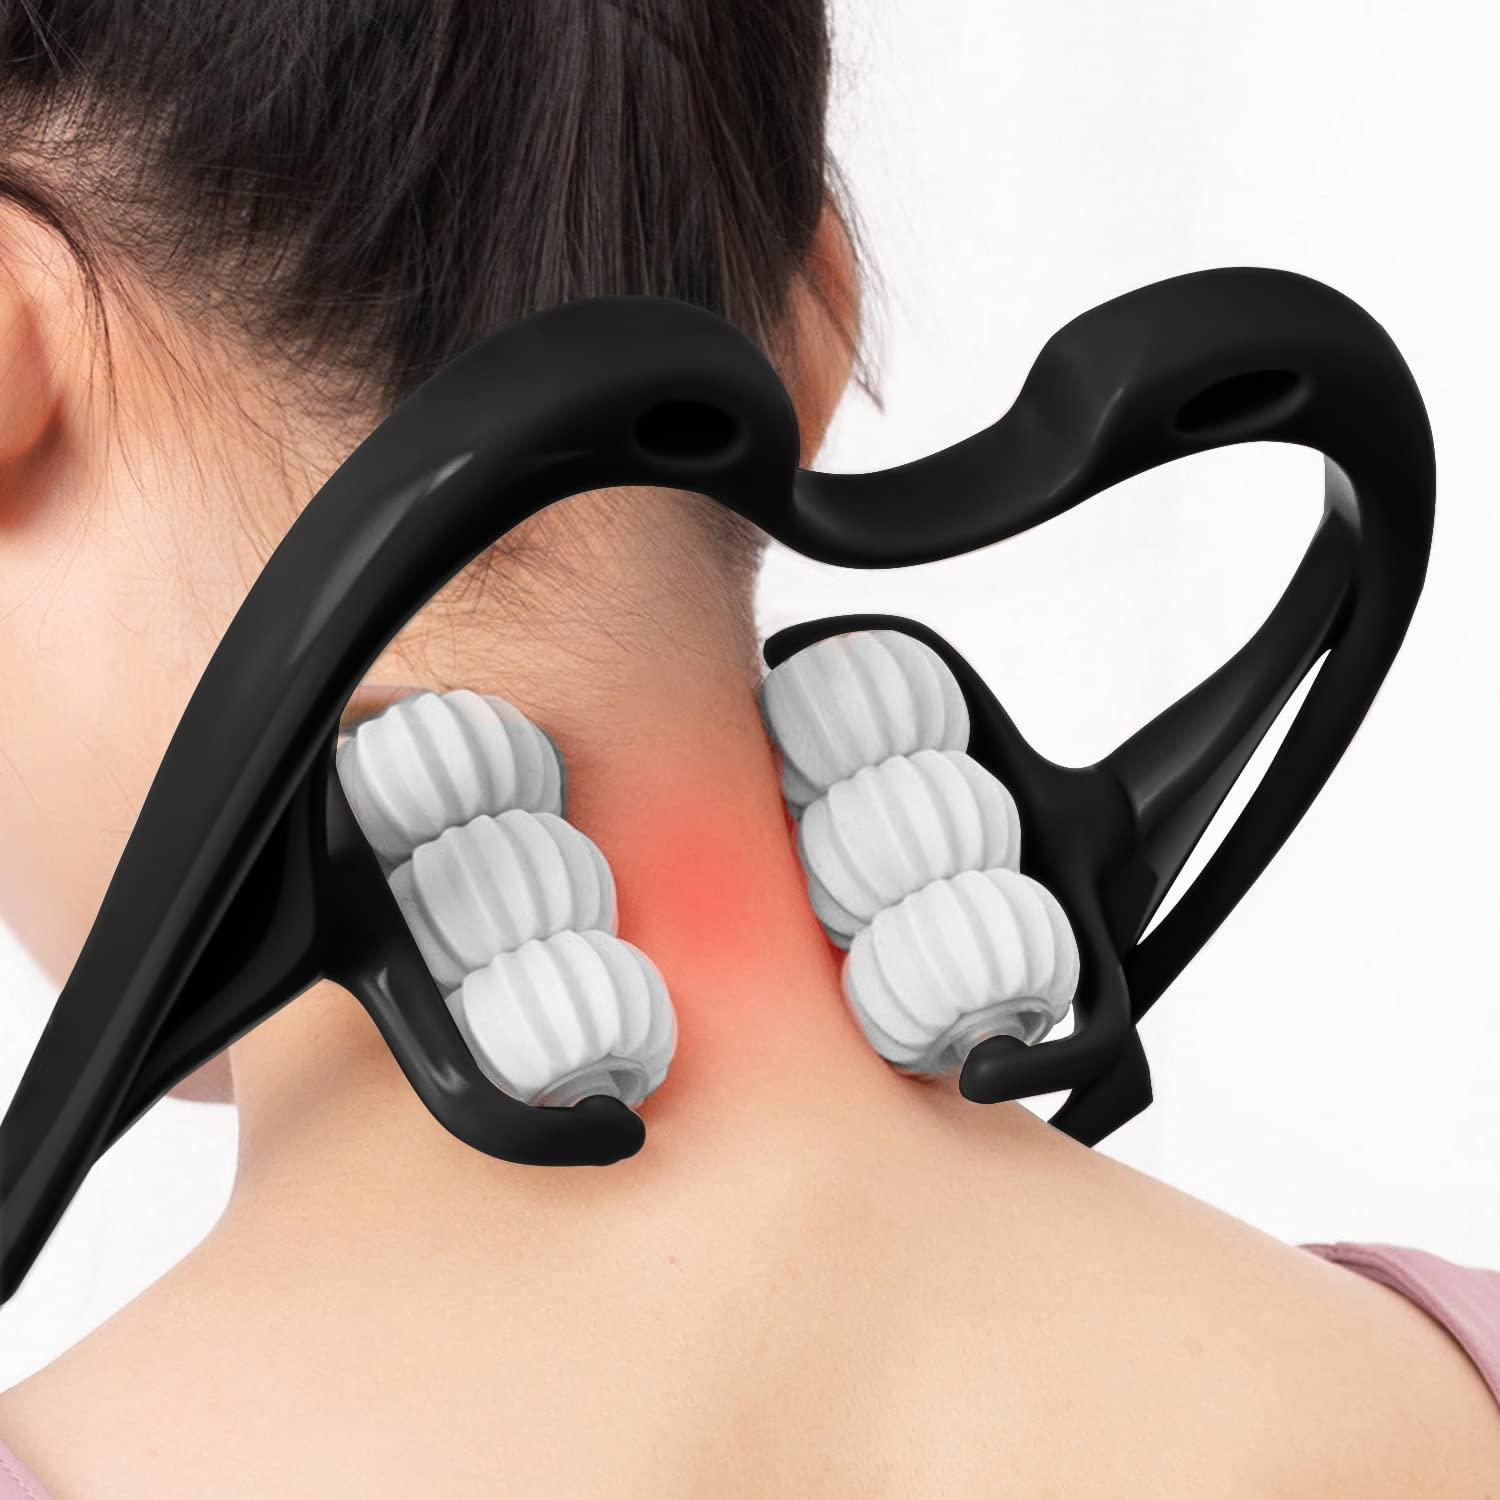 Neck Roller Massager For Pain Relief & Muscle Tension, Handheld